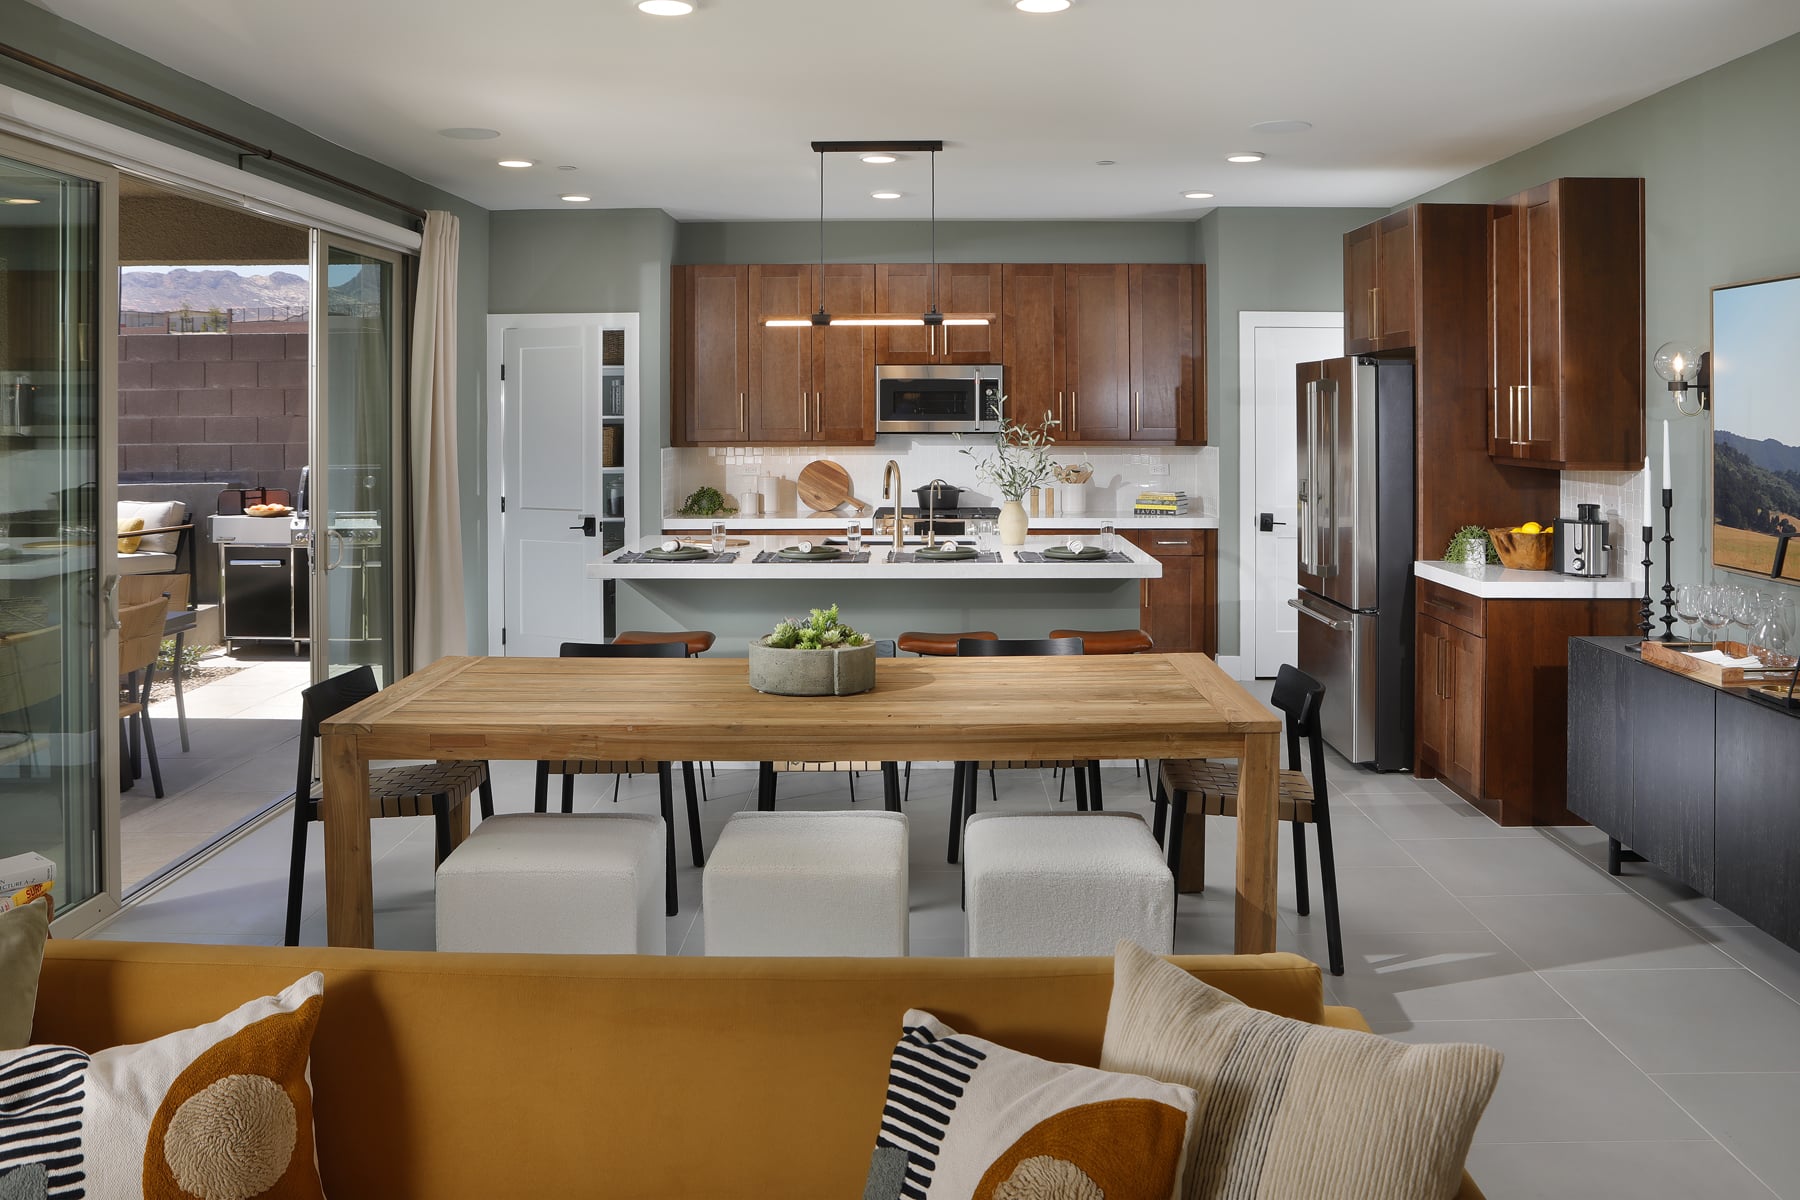 Kitchen of Plan 1 at Arroyos Edge by Tri Pointe Homes